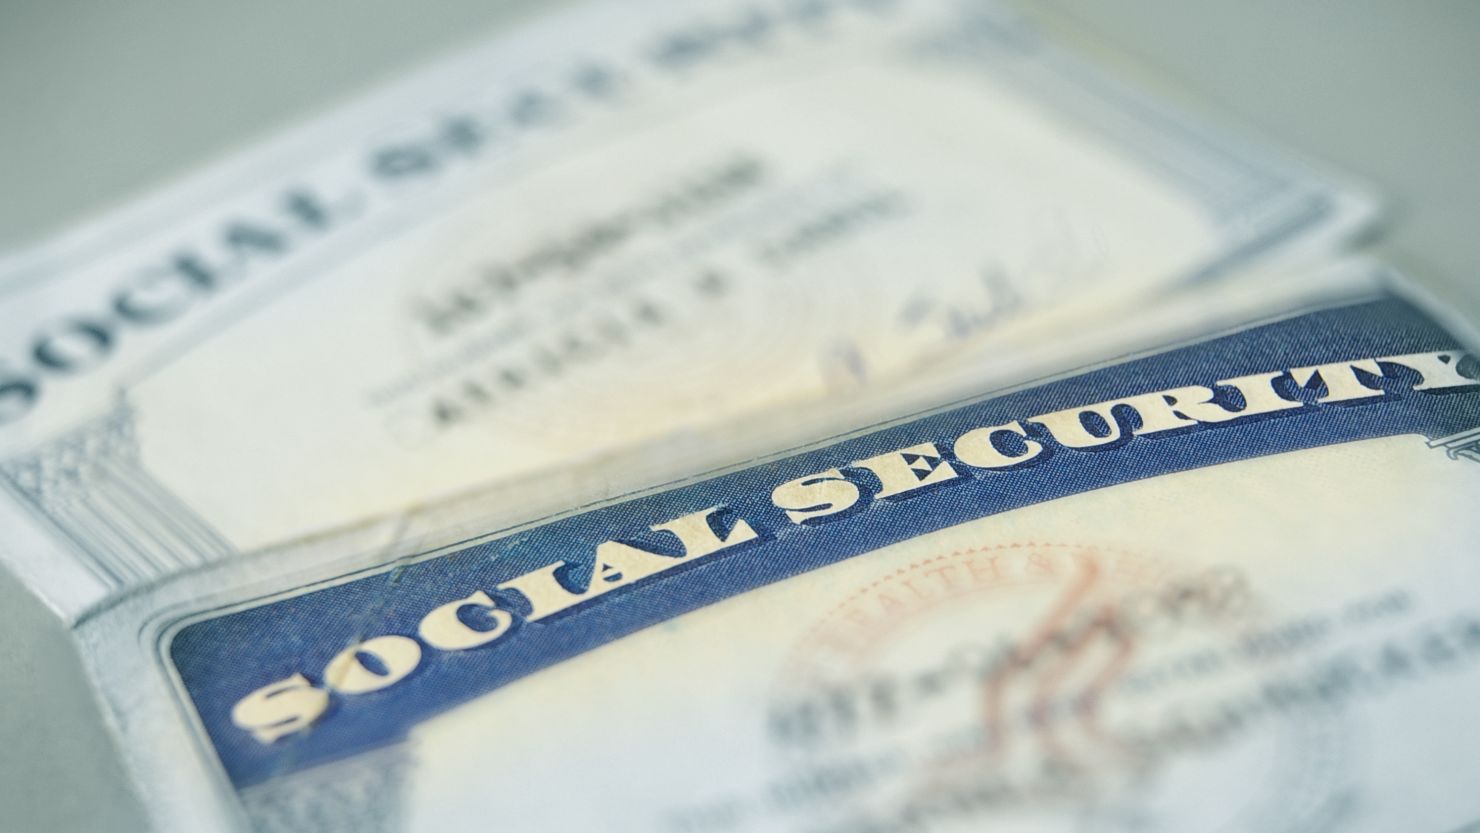 Social Security recipients will get a big cost-of-living adjustment in January.